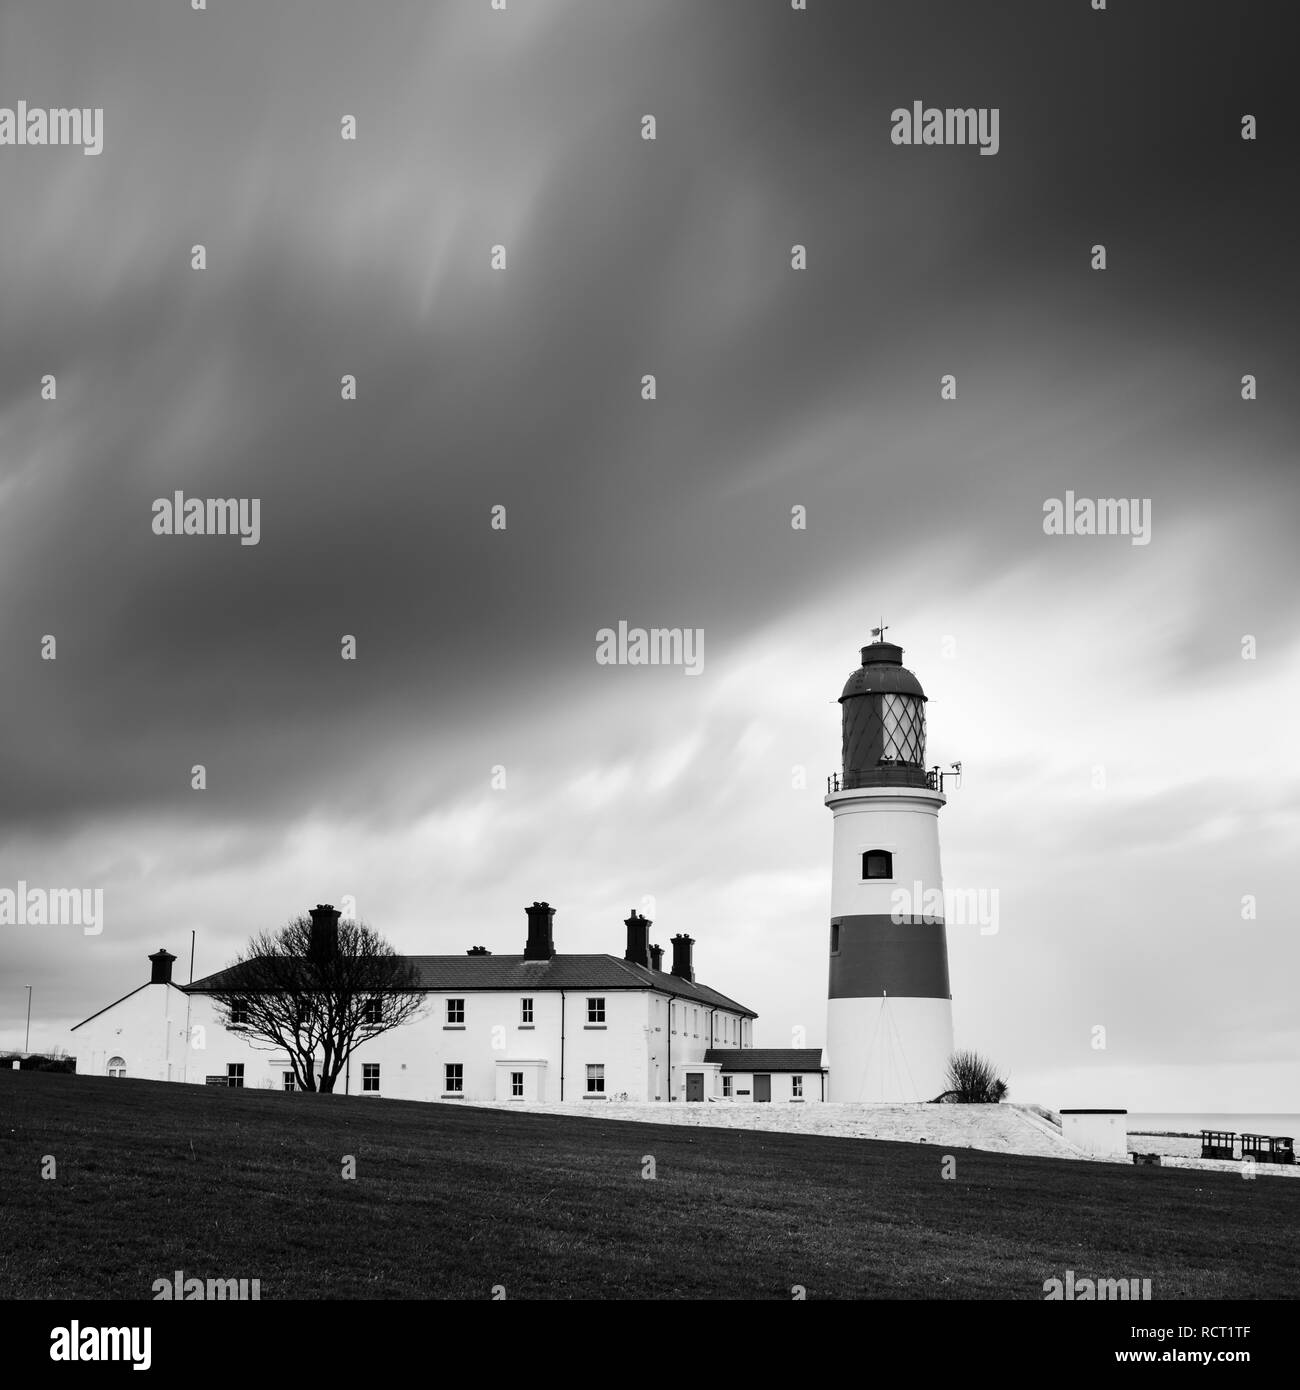 A wet & windy winter sunrise, a brief glimse of the sun lights up the clouds before dark storm clouds quickly follow engulfing the lighthouse Stock Photo